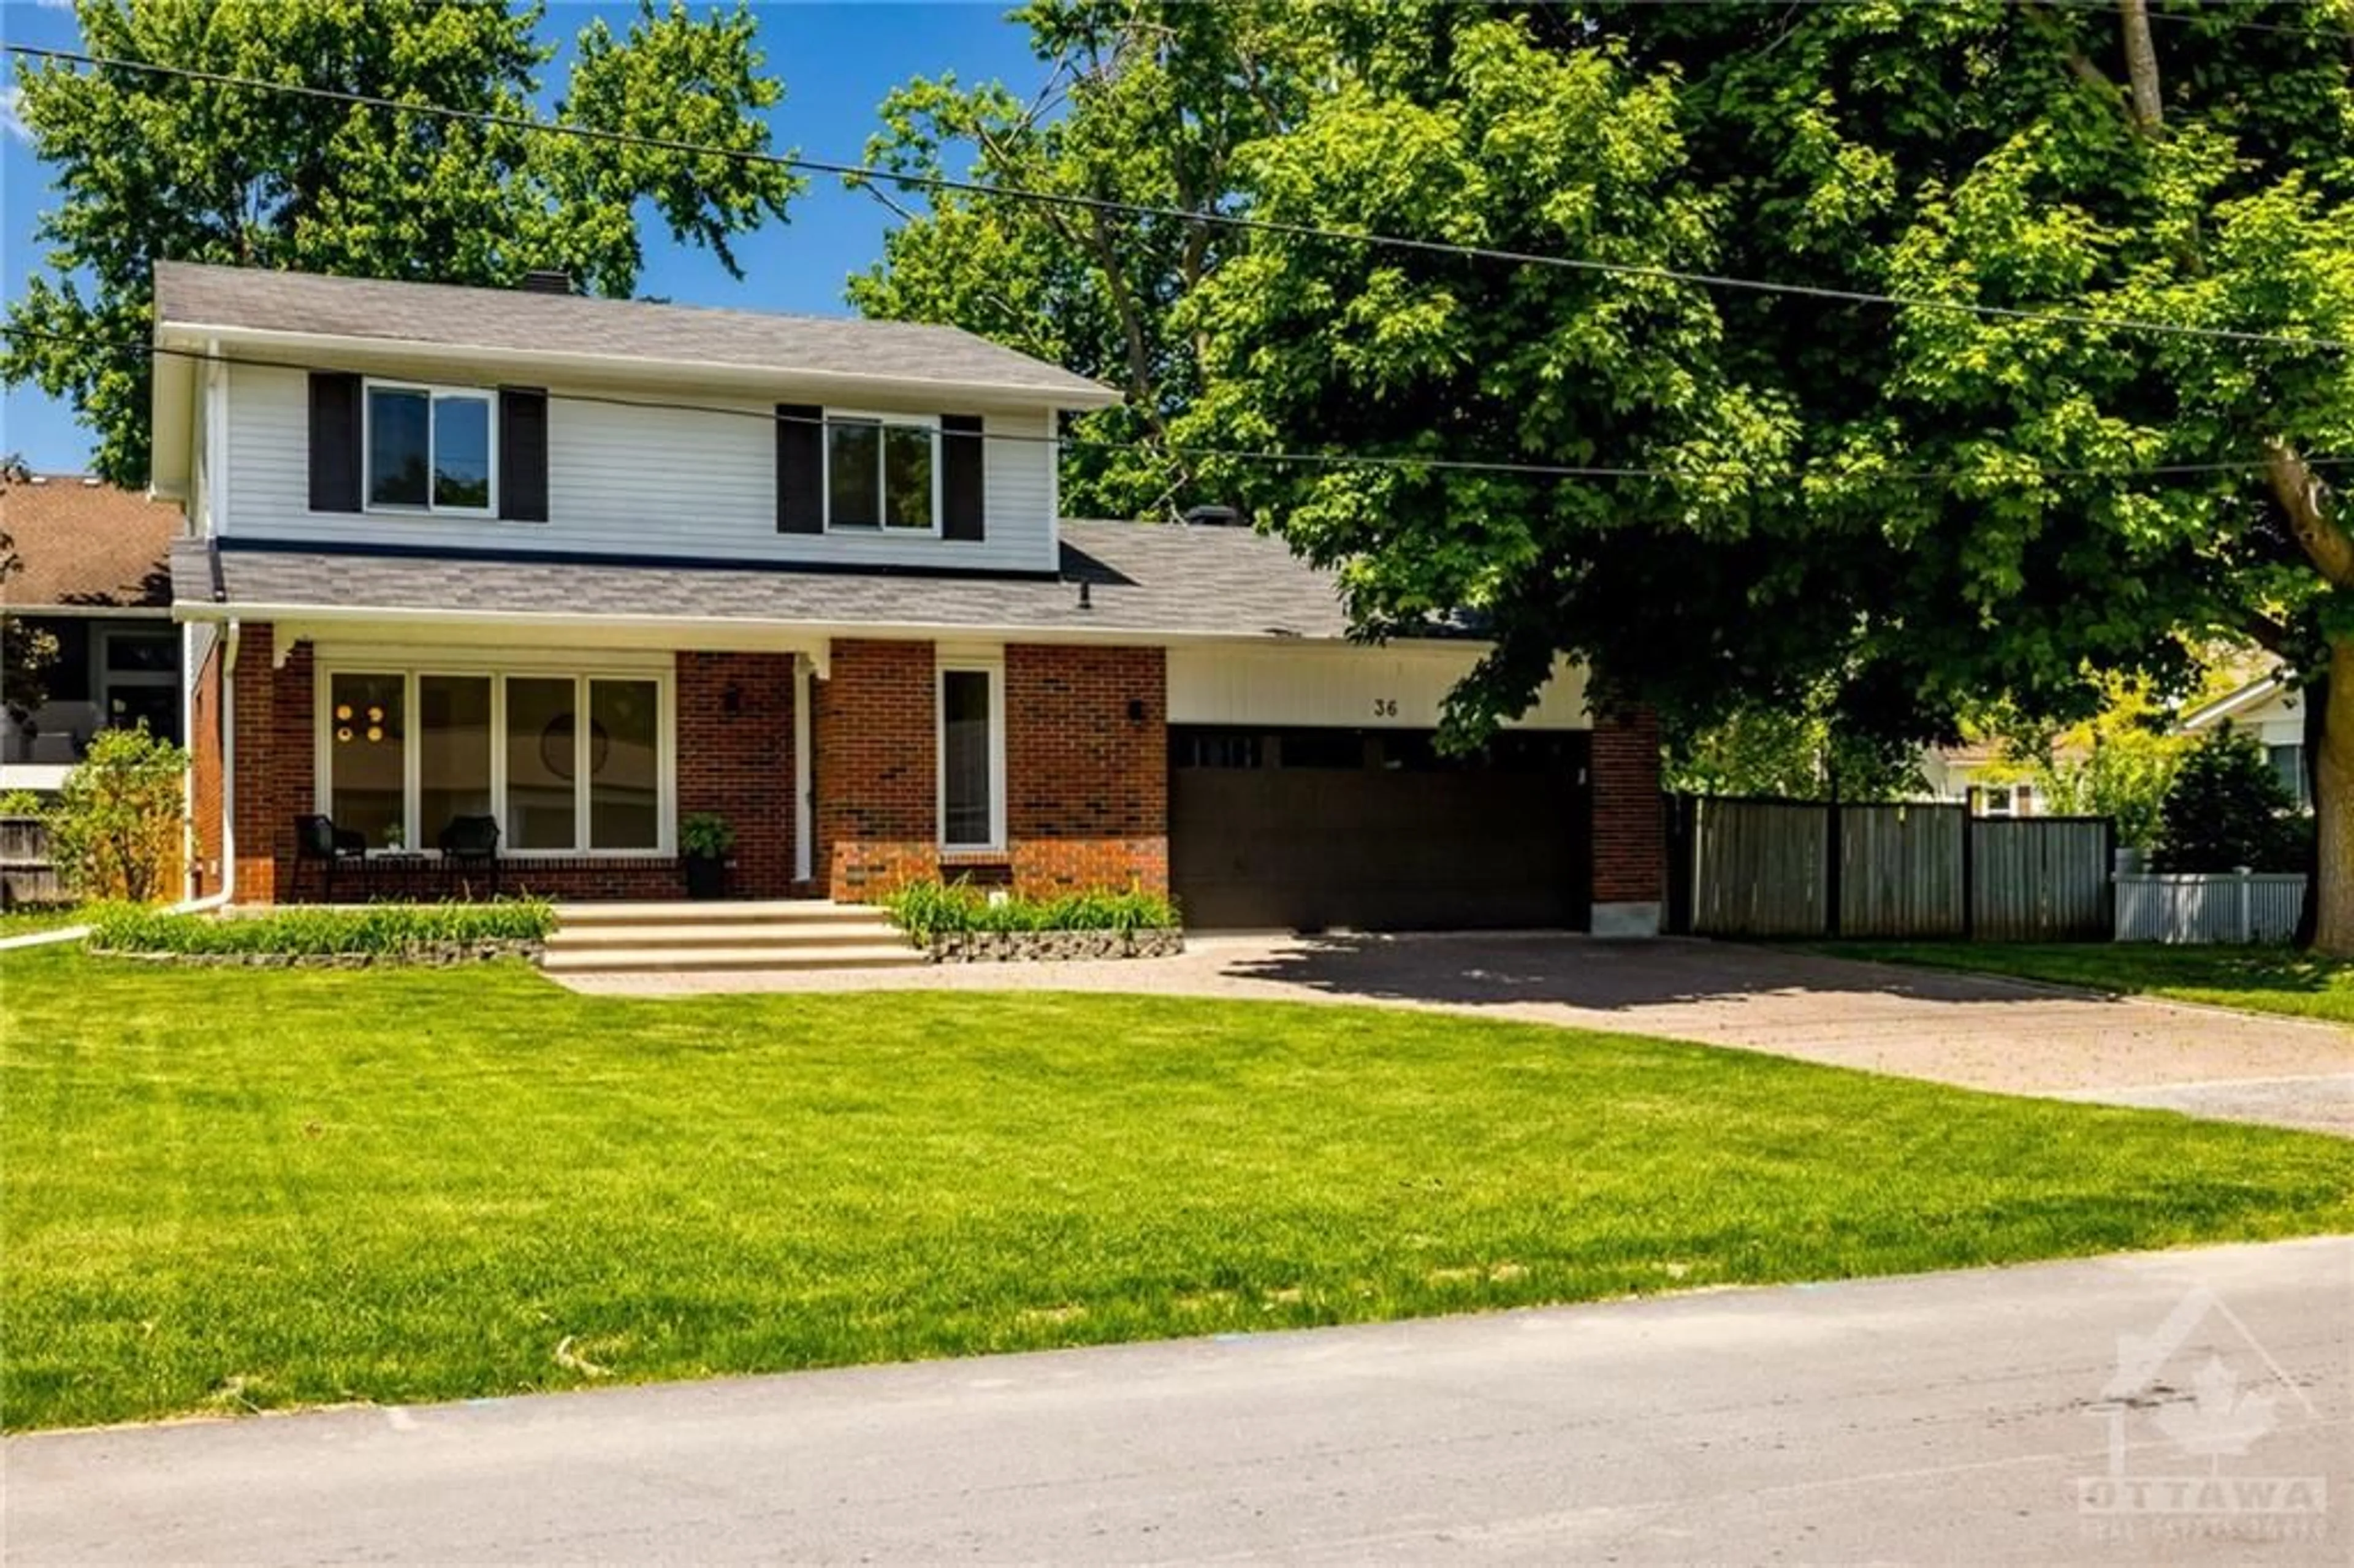 Home with brick exterior material for 36 CHERRY Dr, Ottawa Ontario K2S 1J1